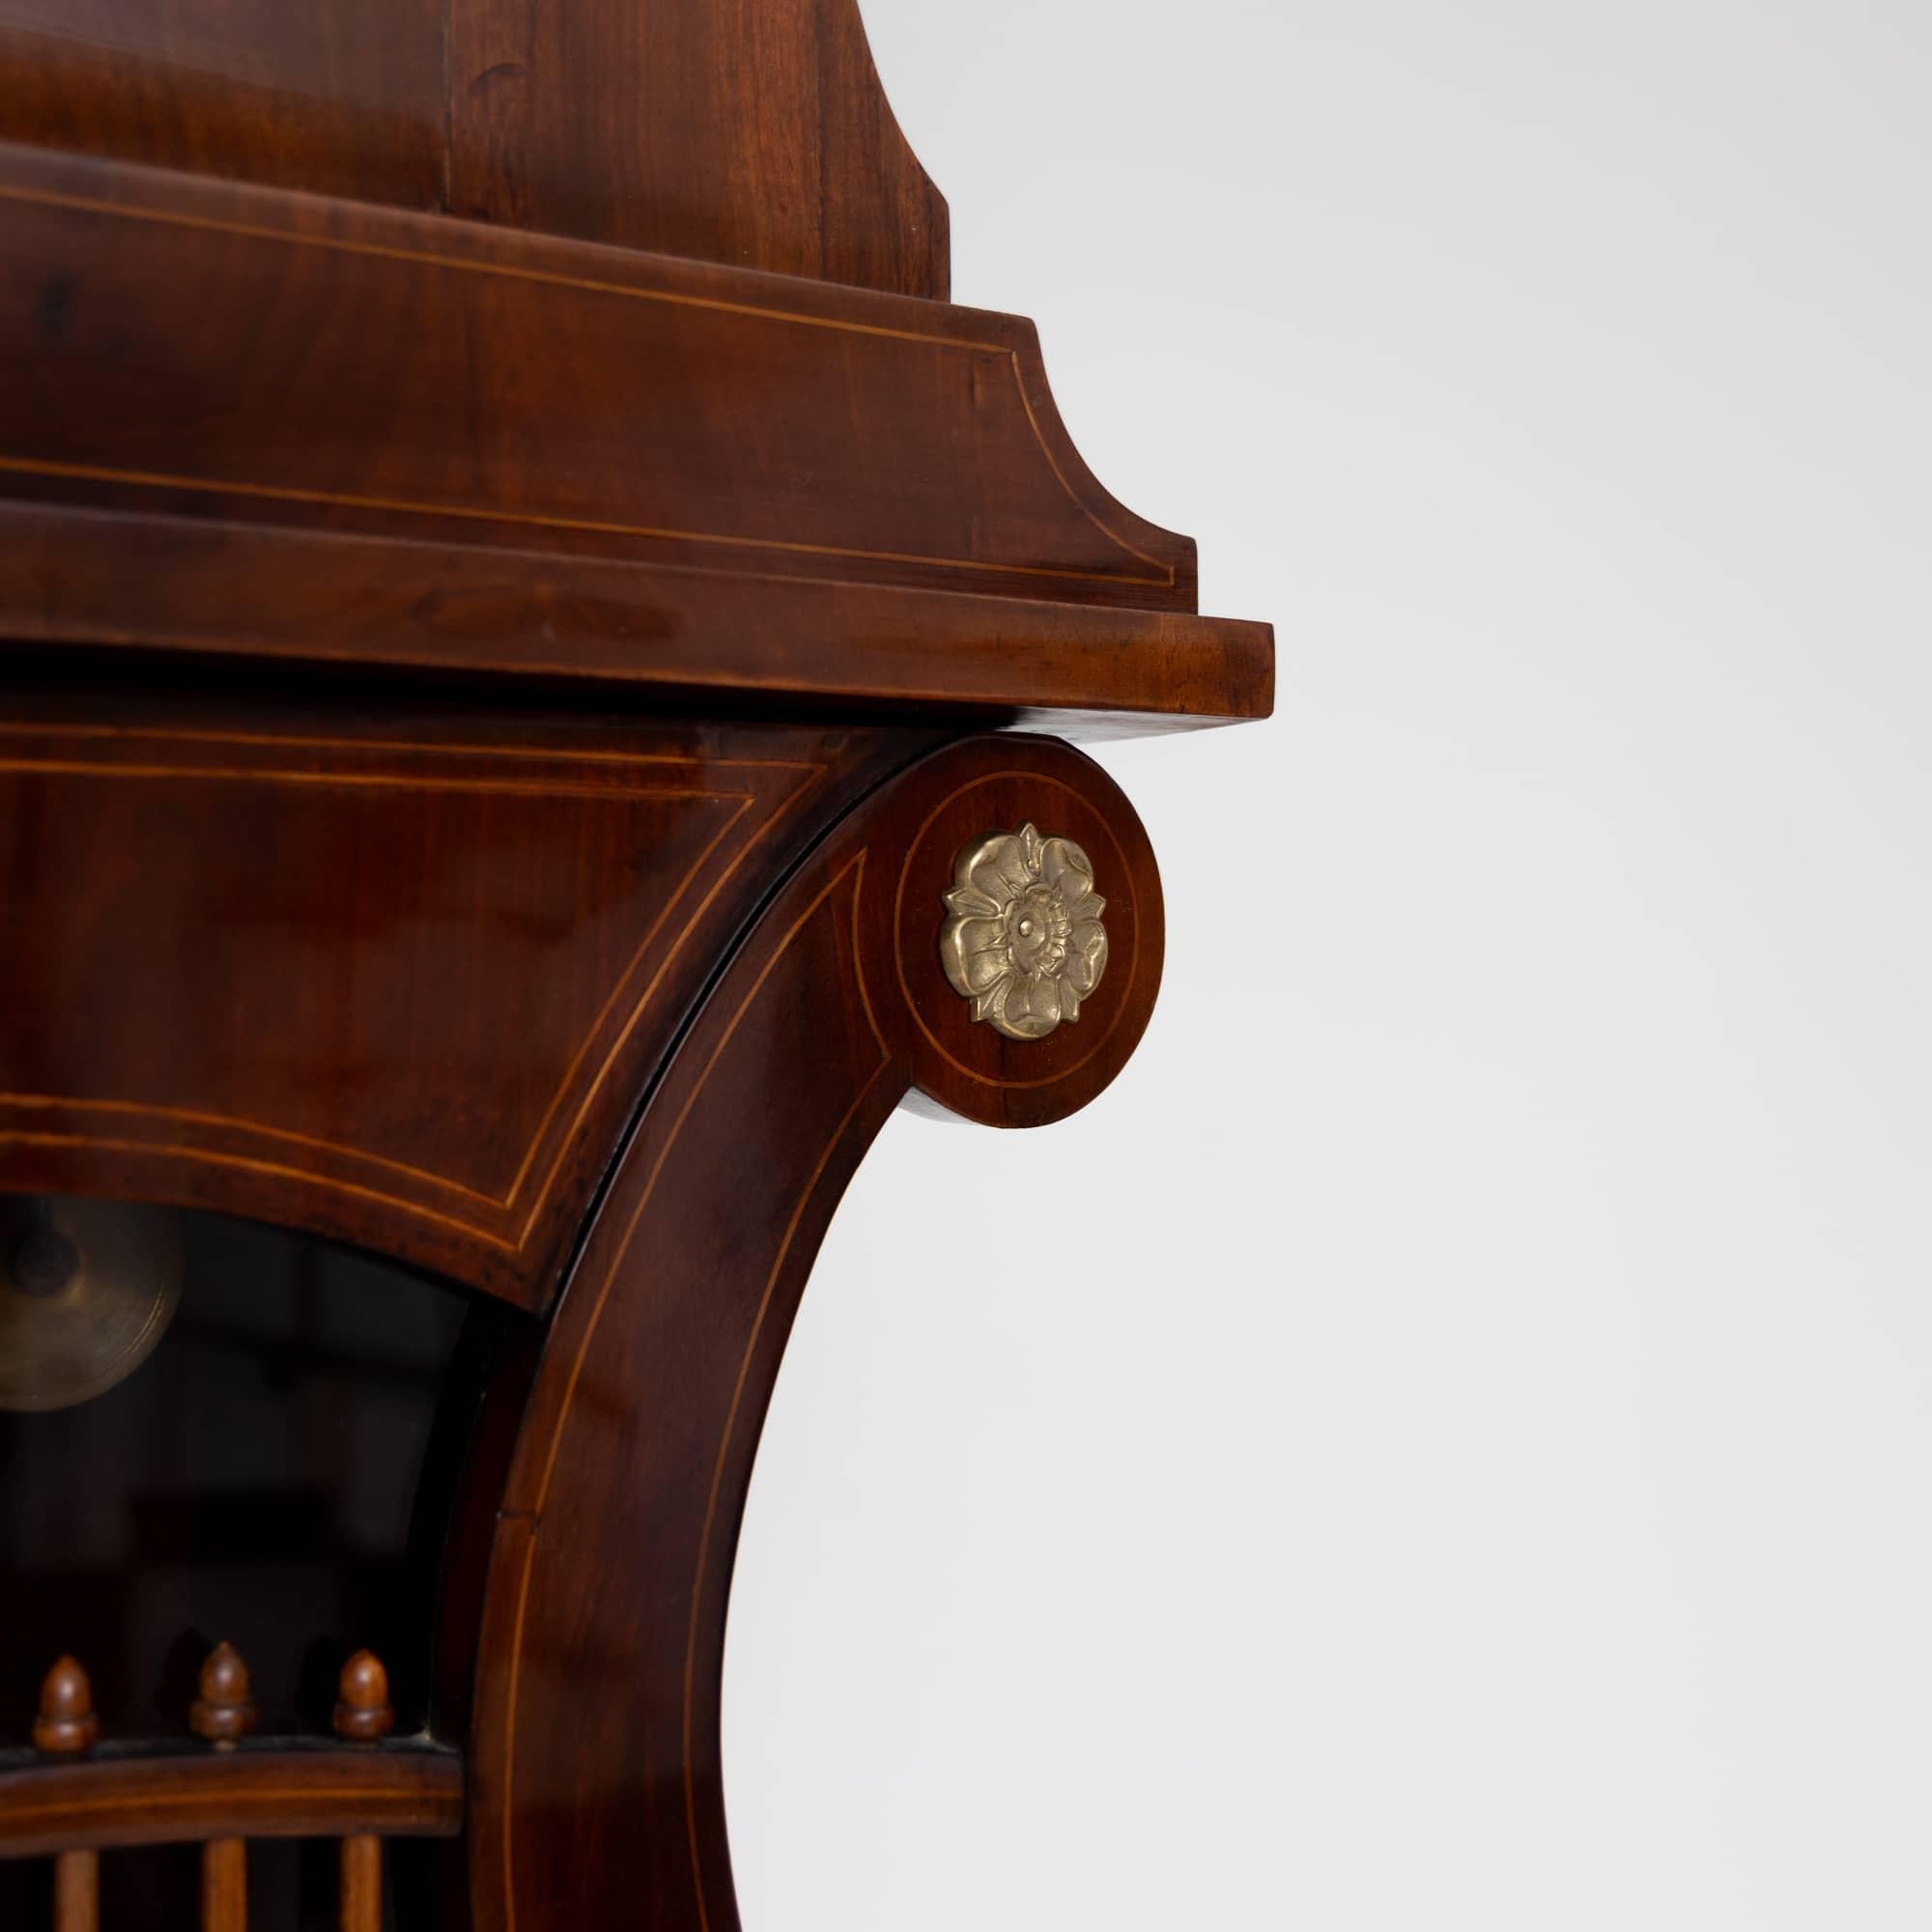 Empire Mahogany Grandfather Clock, early 19th Century In Good Condition For Sale In Greding, DE